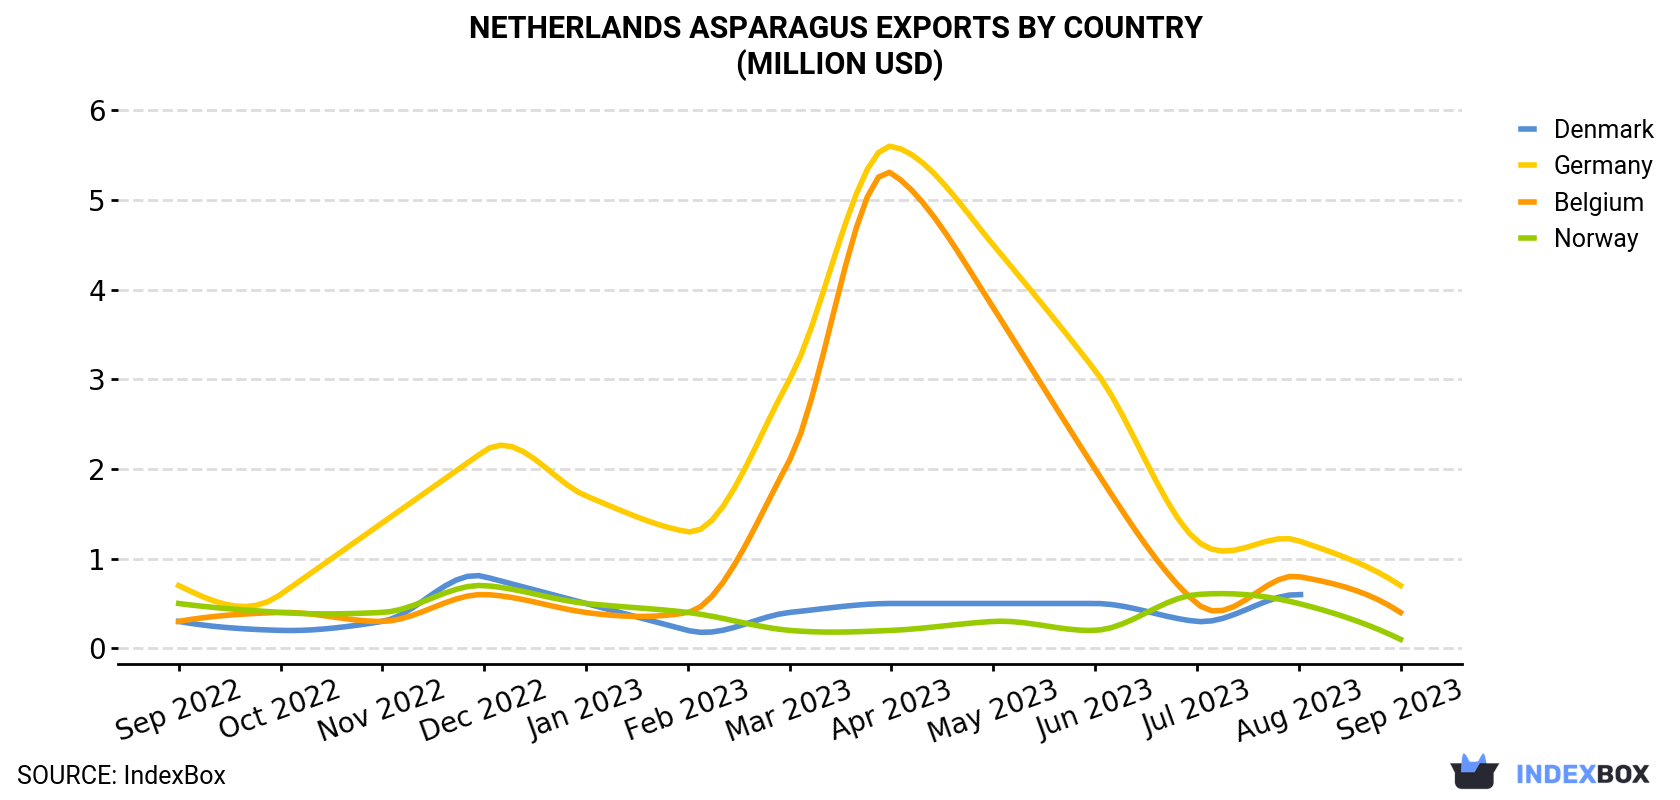 Netherlands Asparagus Exports By Country (Million USD)